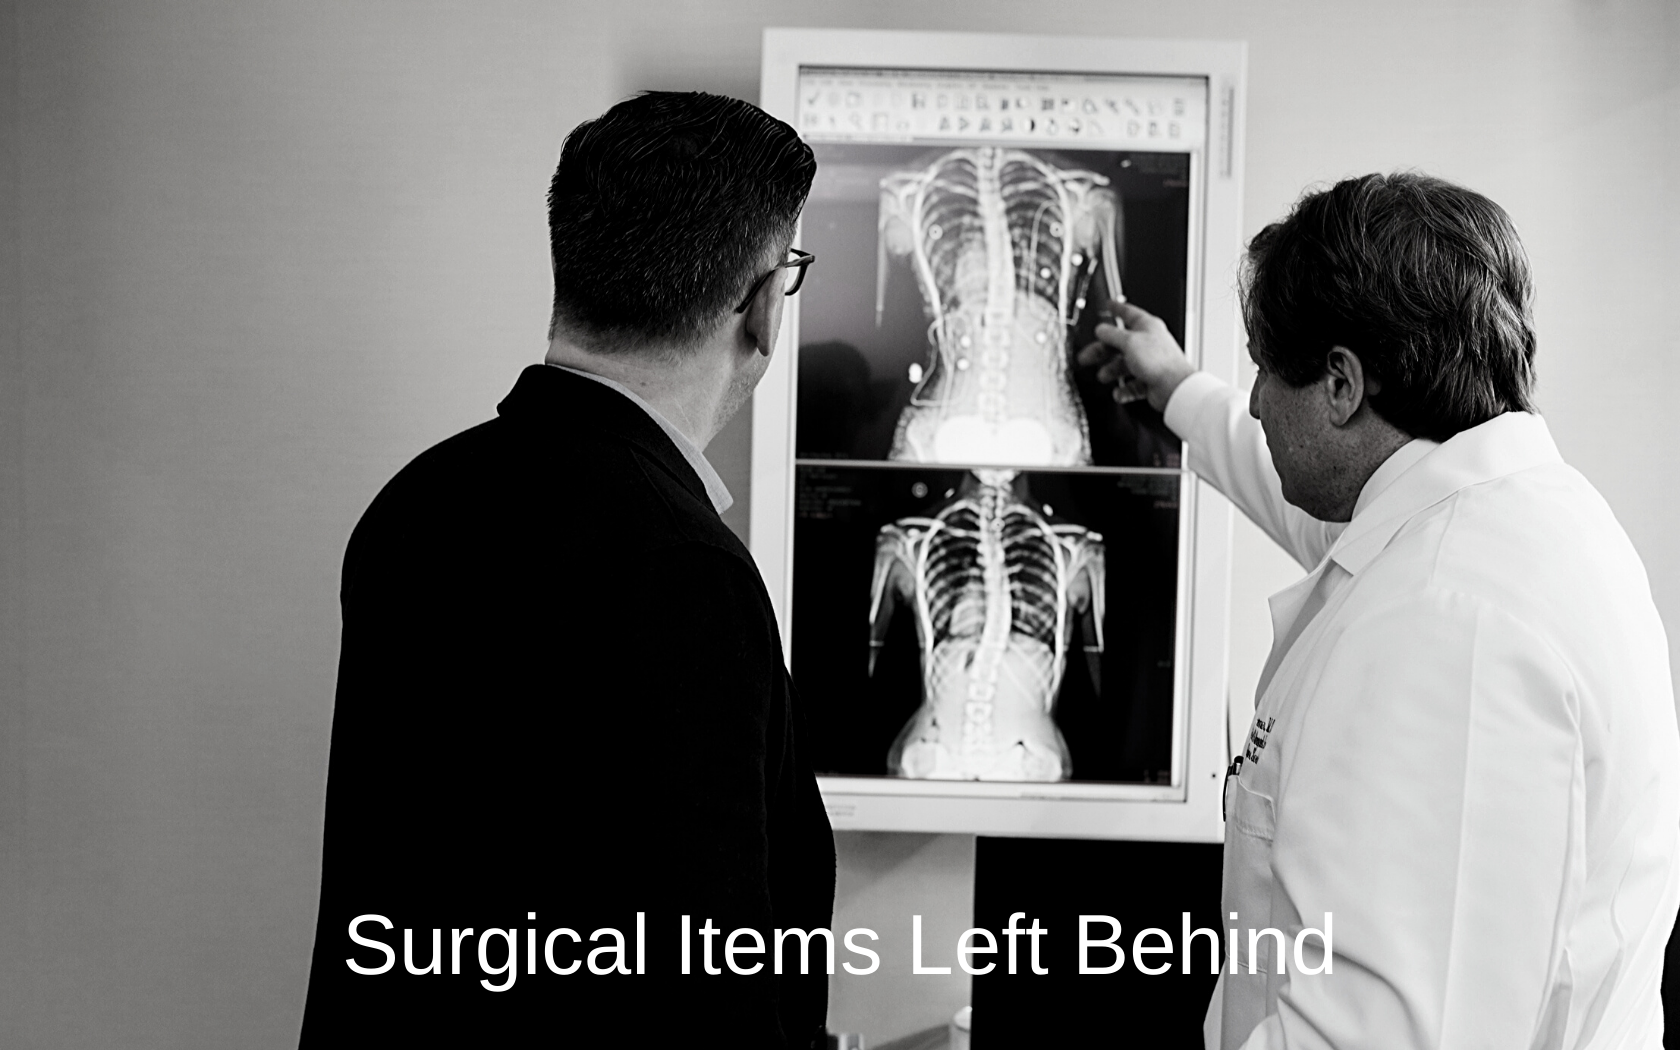 A doctor looks at an x-ray while explaining something to a patient.